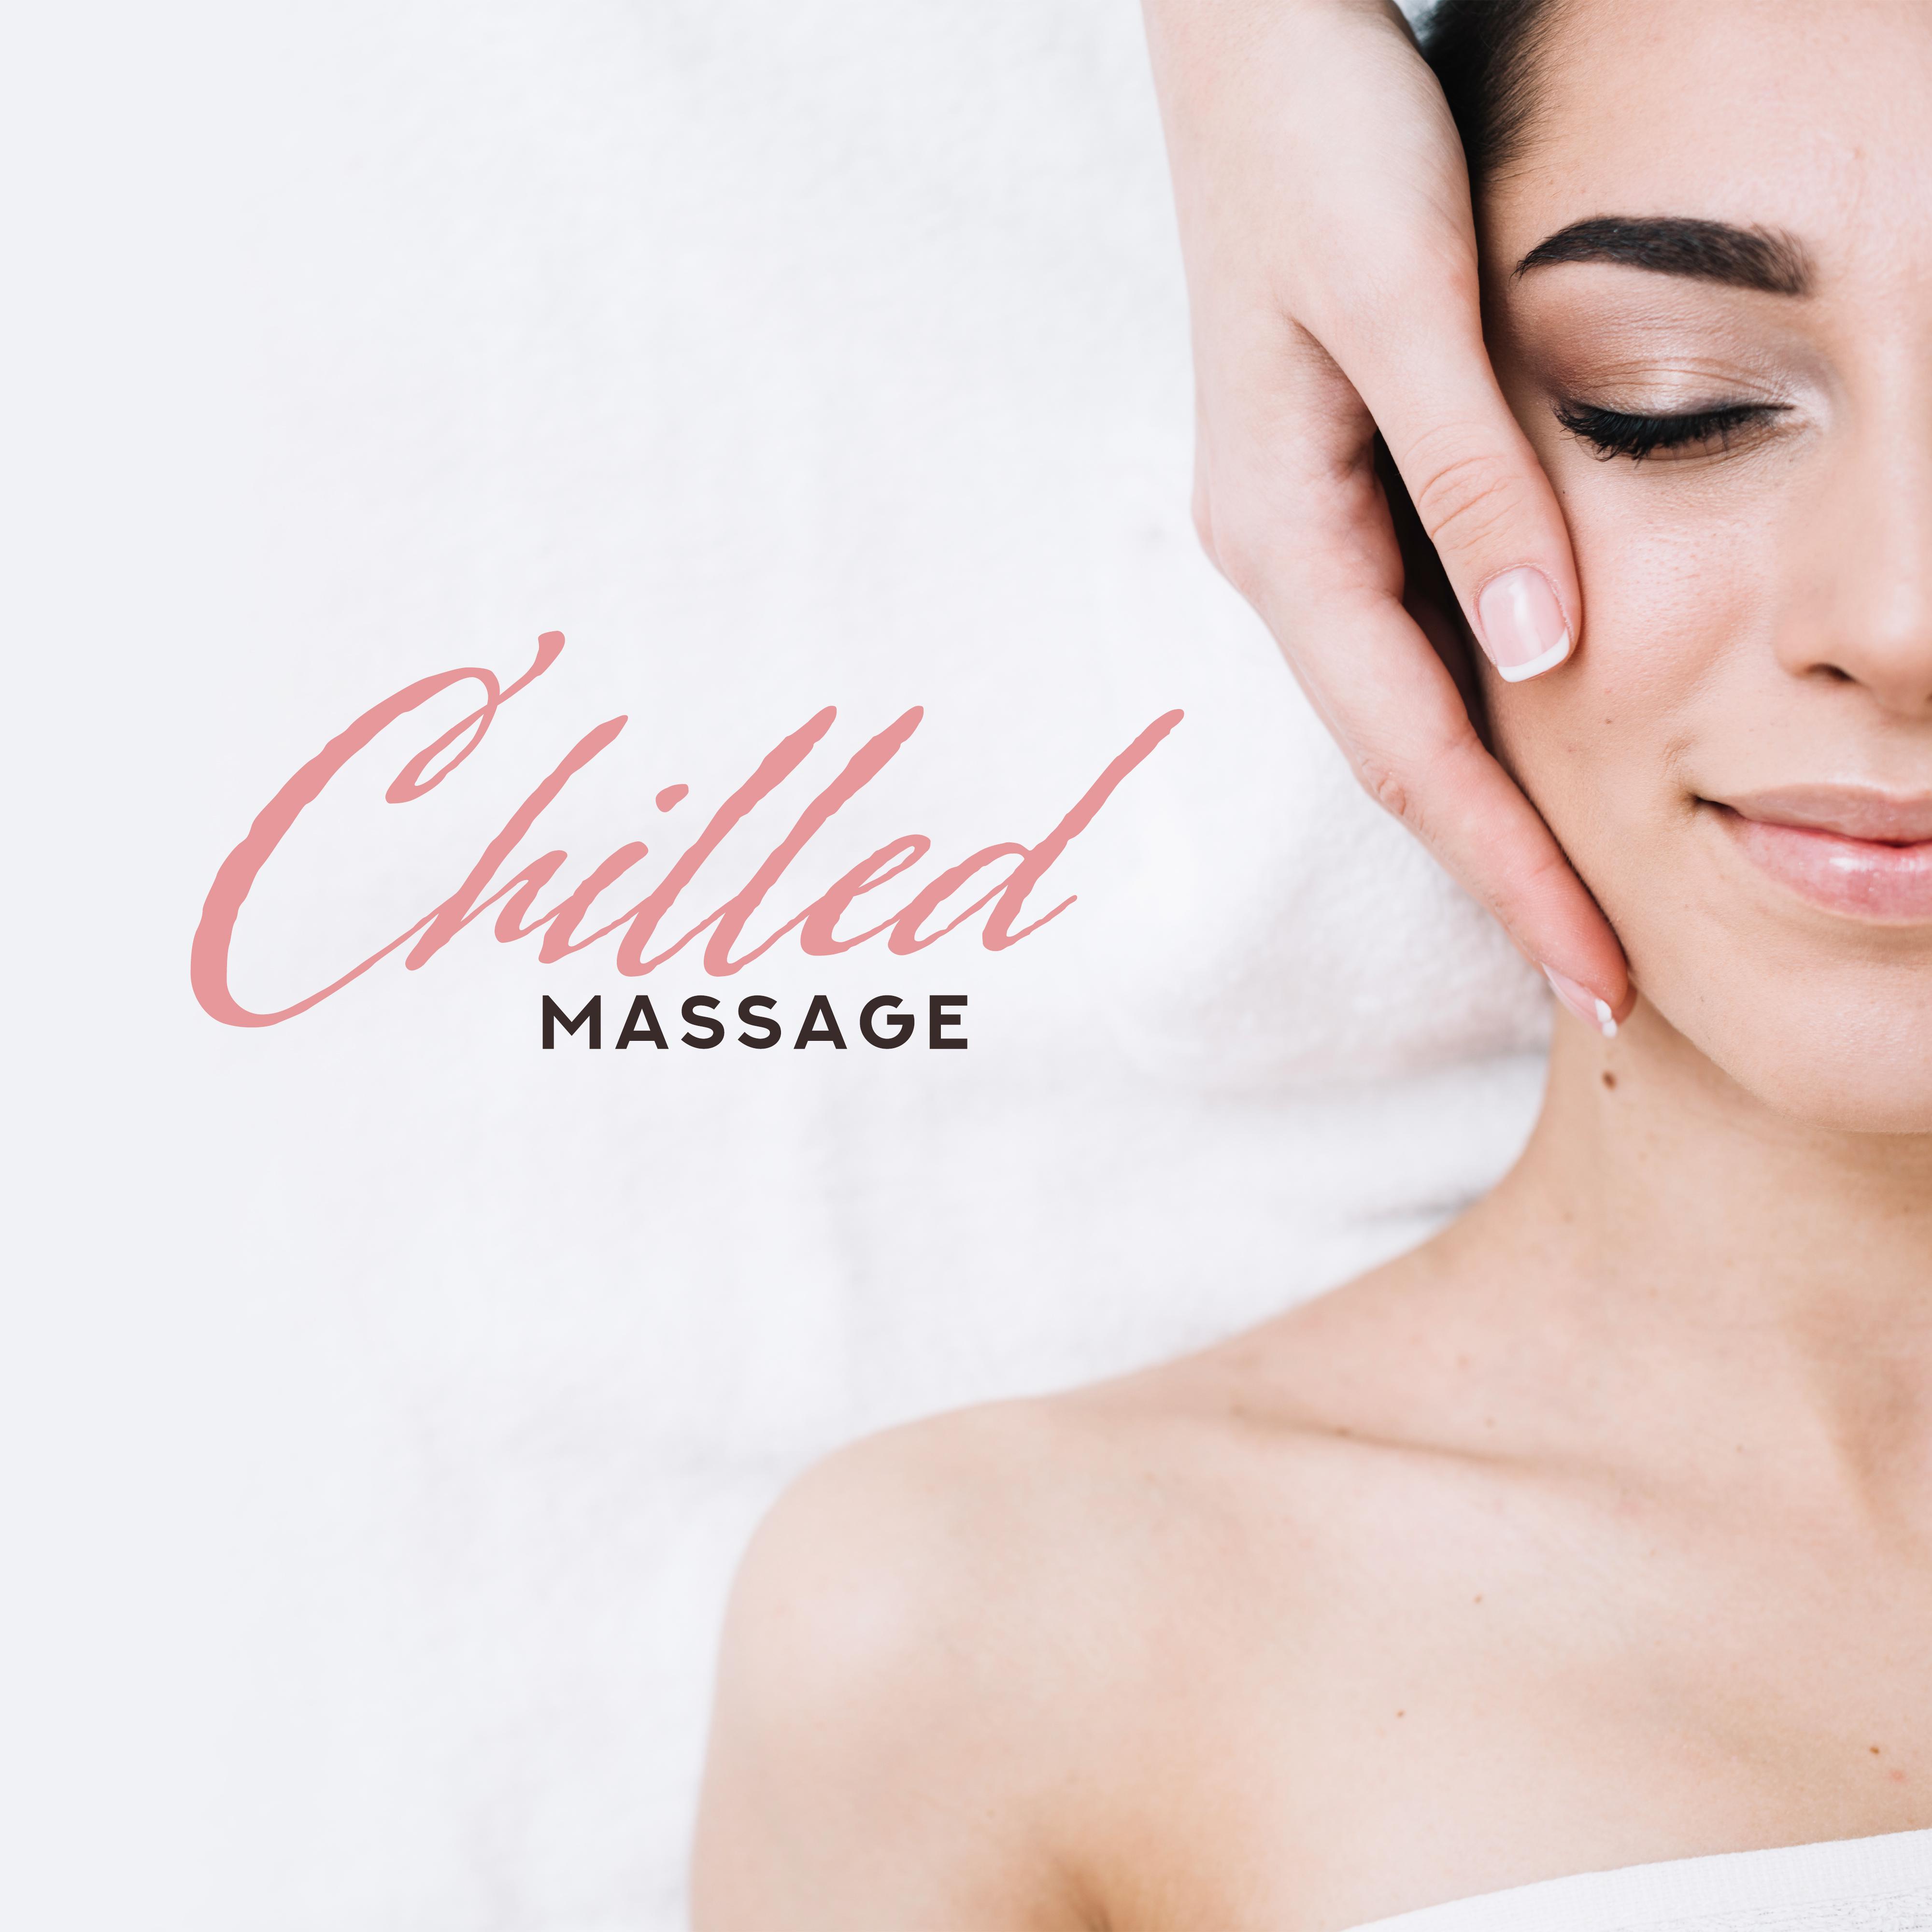 Chilled Massage: Chill Out 2019 for Spa, Relaxation, Wellness, Deep Rest, Spa Lounge